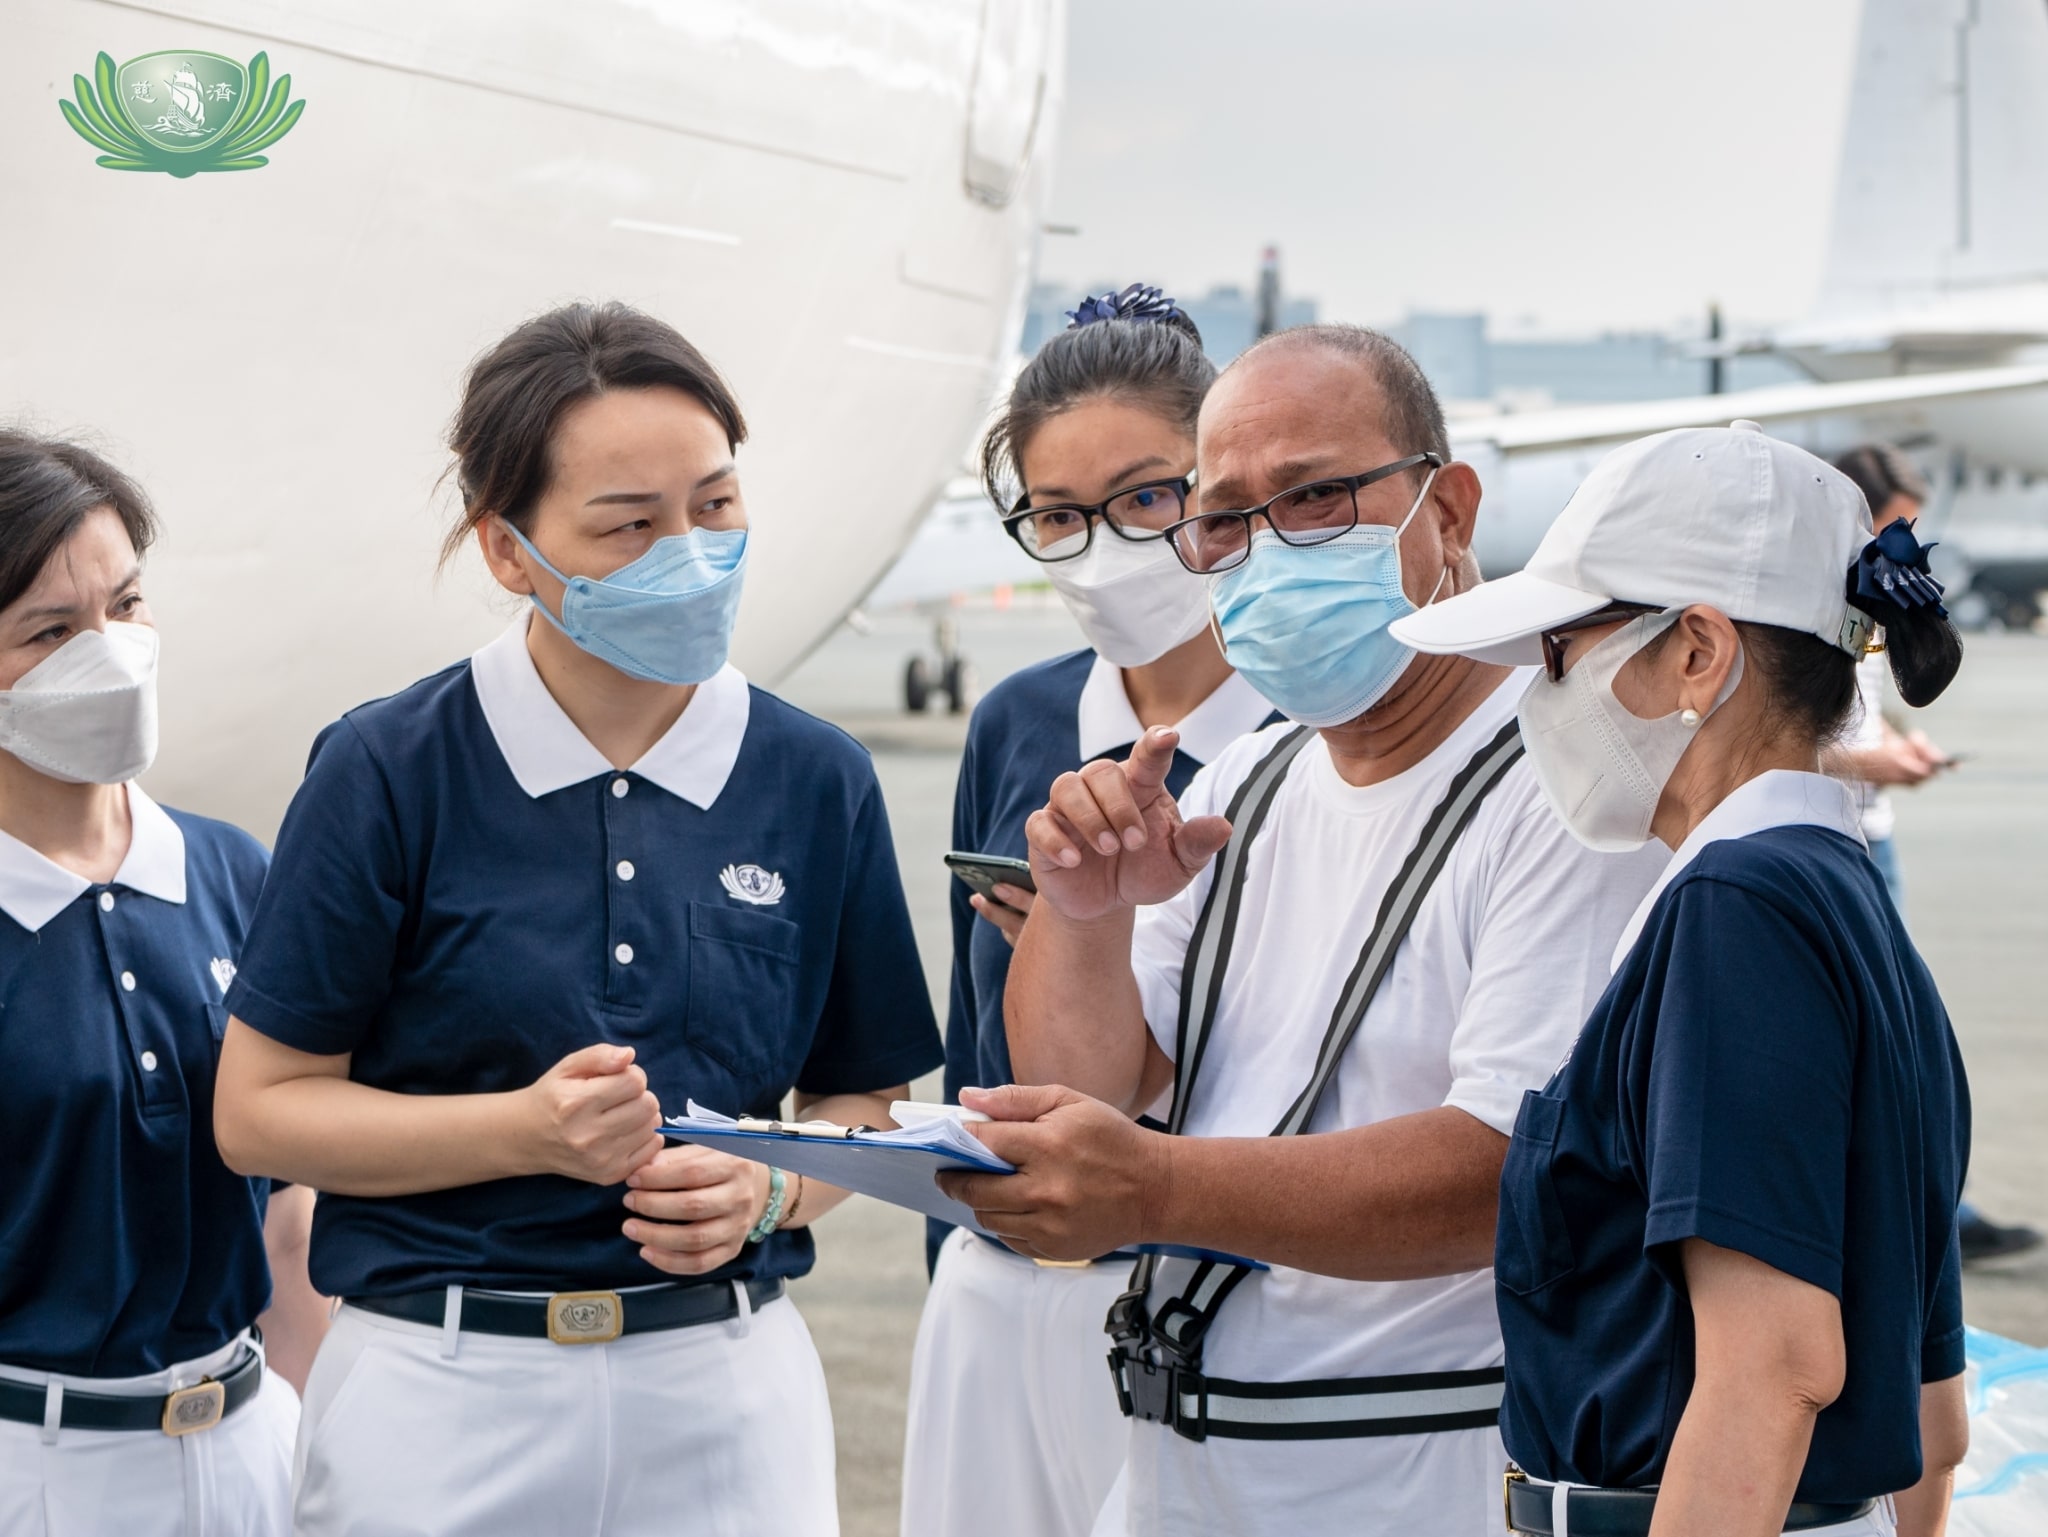 Tzu Chi volunteers coordinate the packing of donated blankets with the loading master. 【Photo by Daniel Lazar】